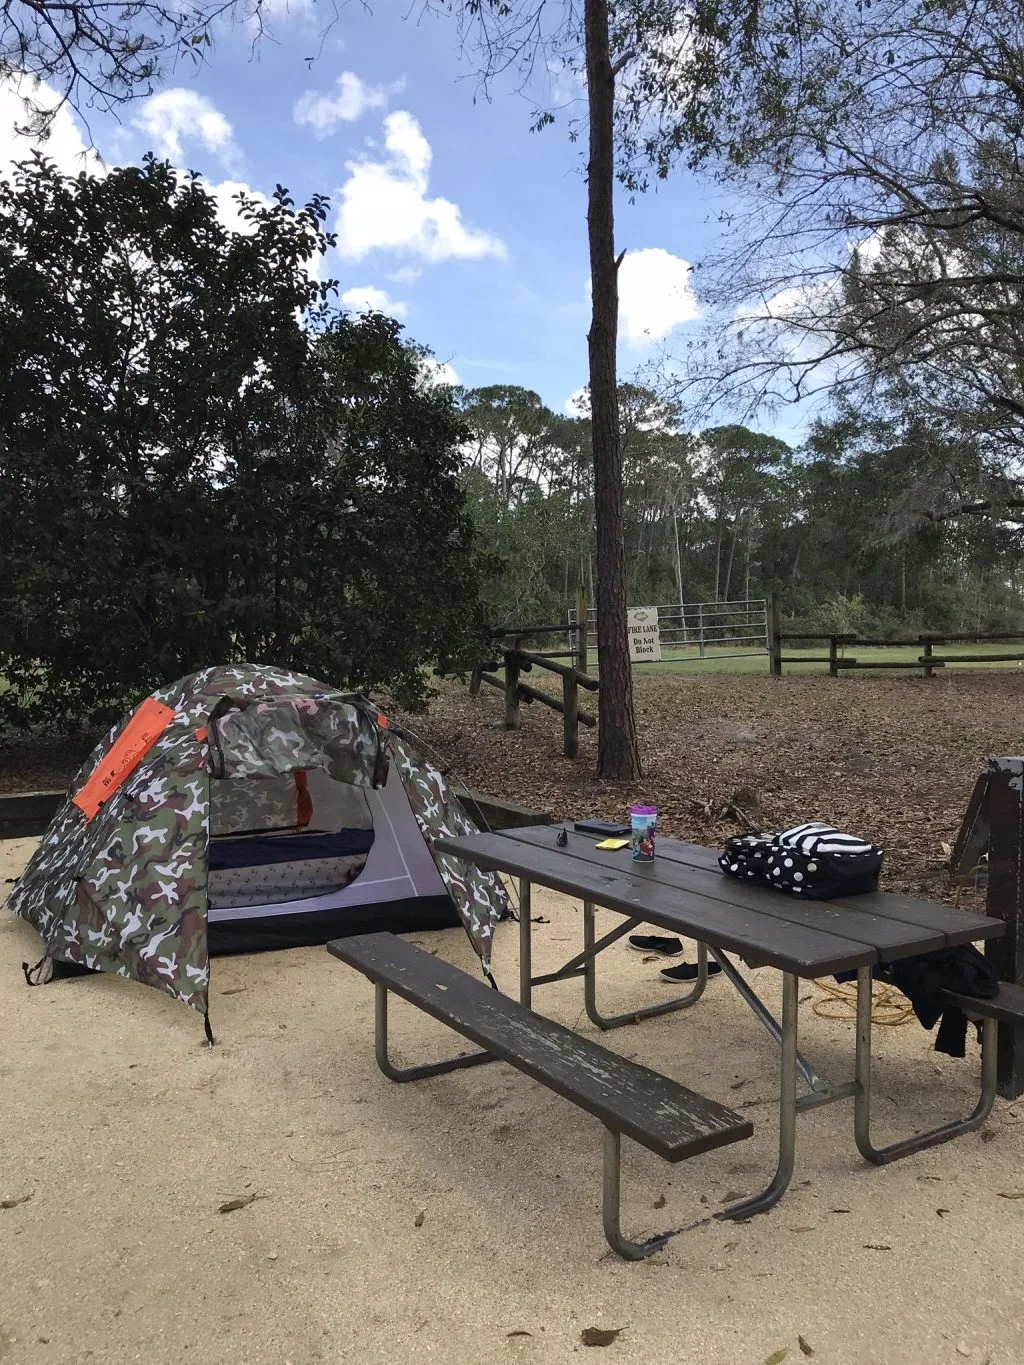 camping at disney world tent campsite with picnic table